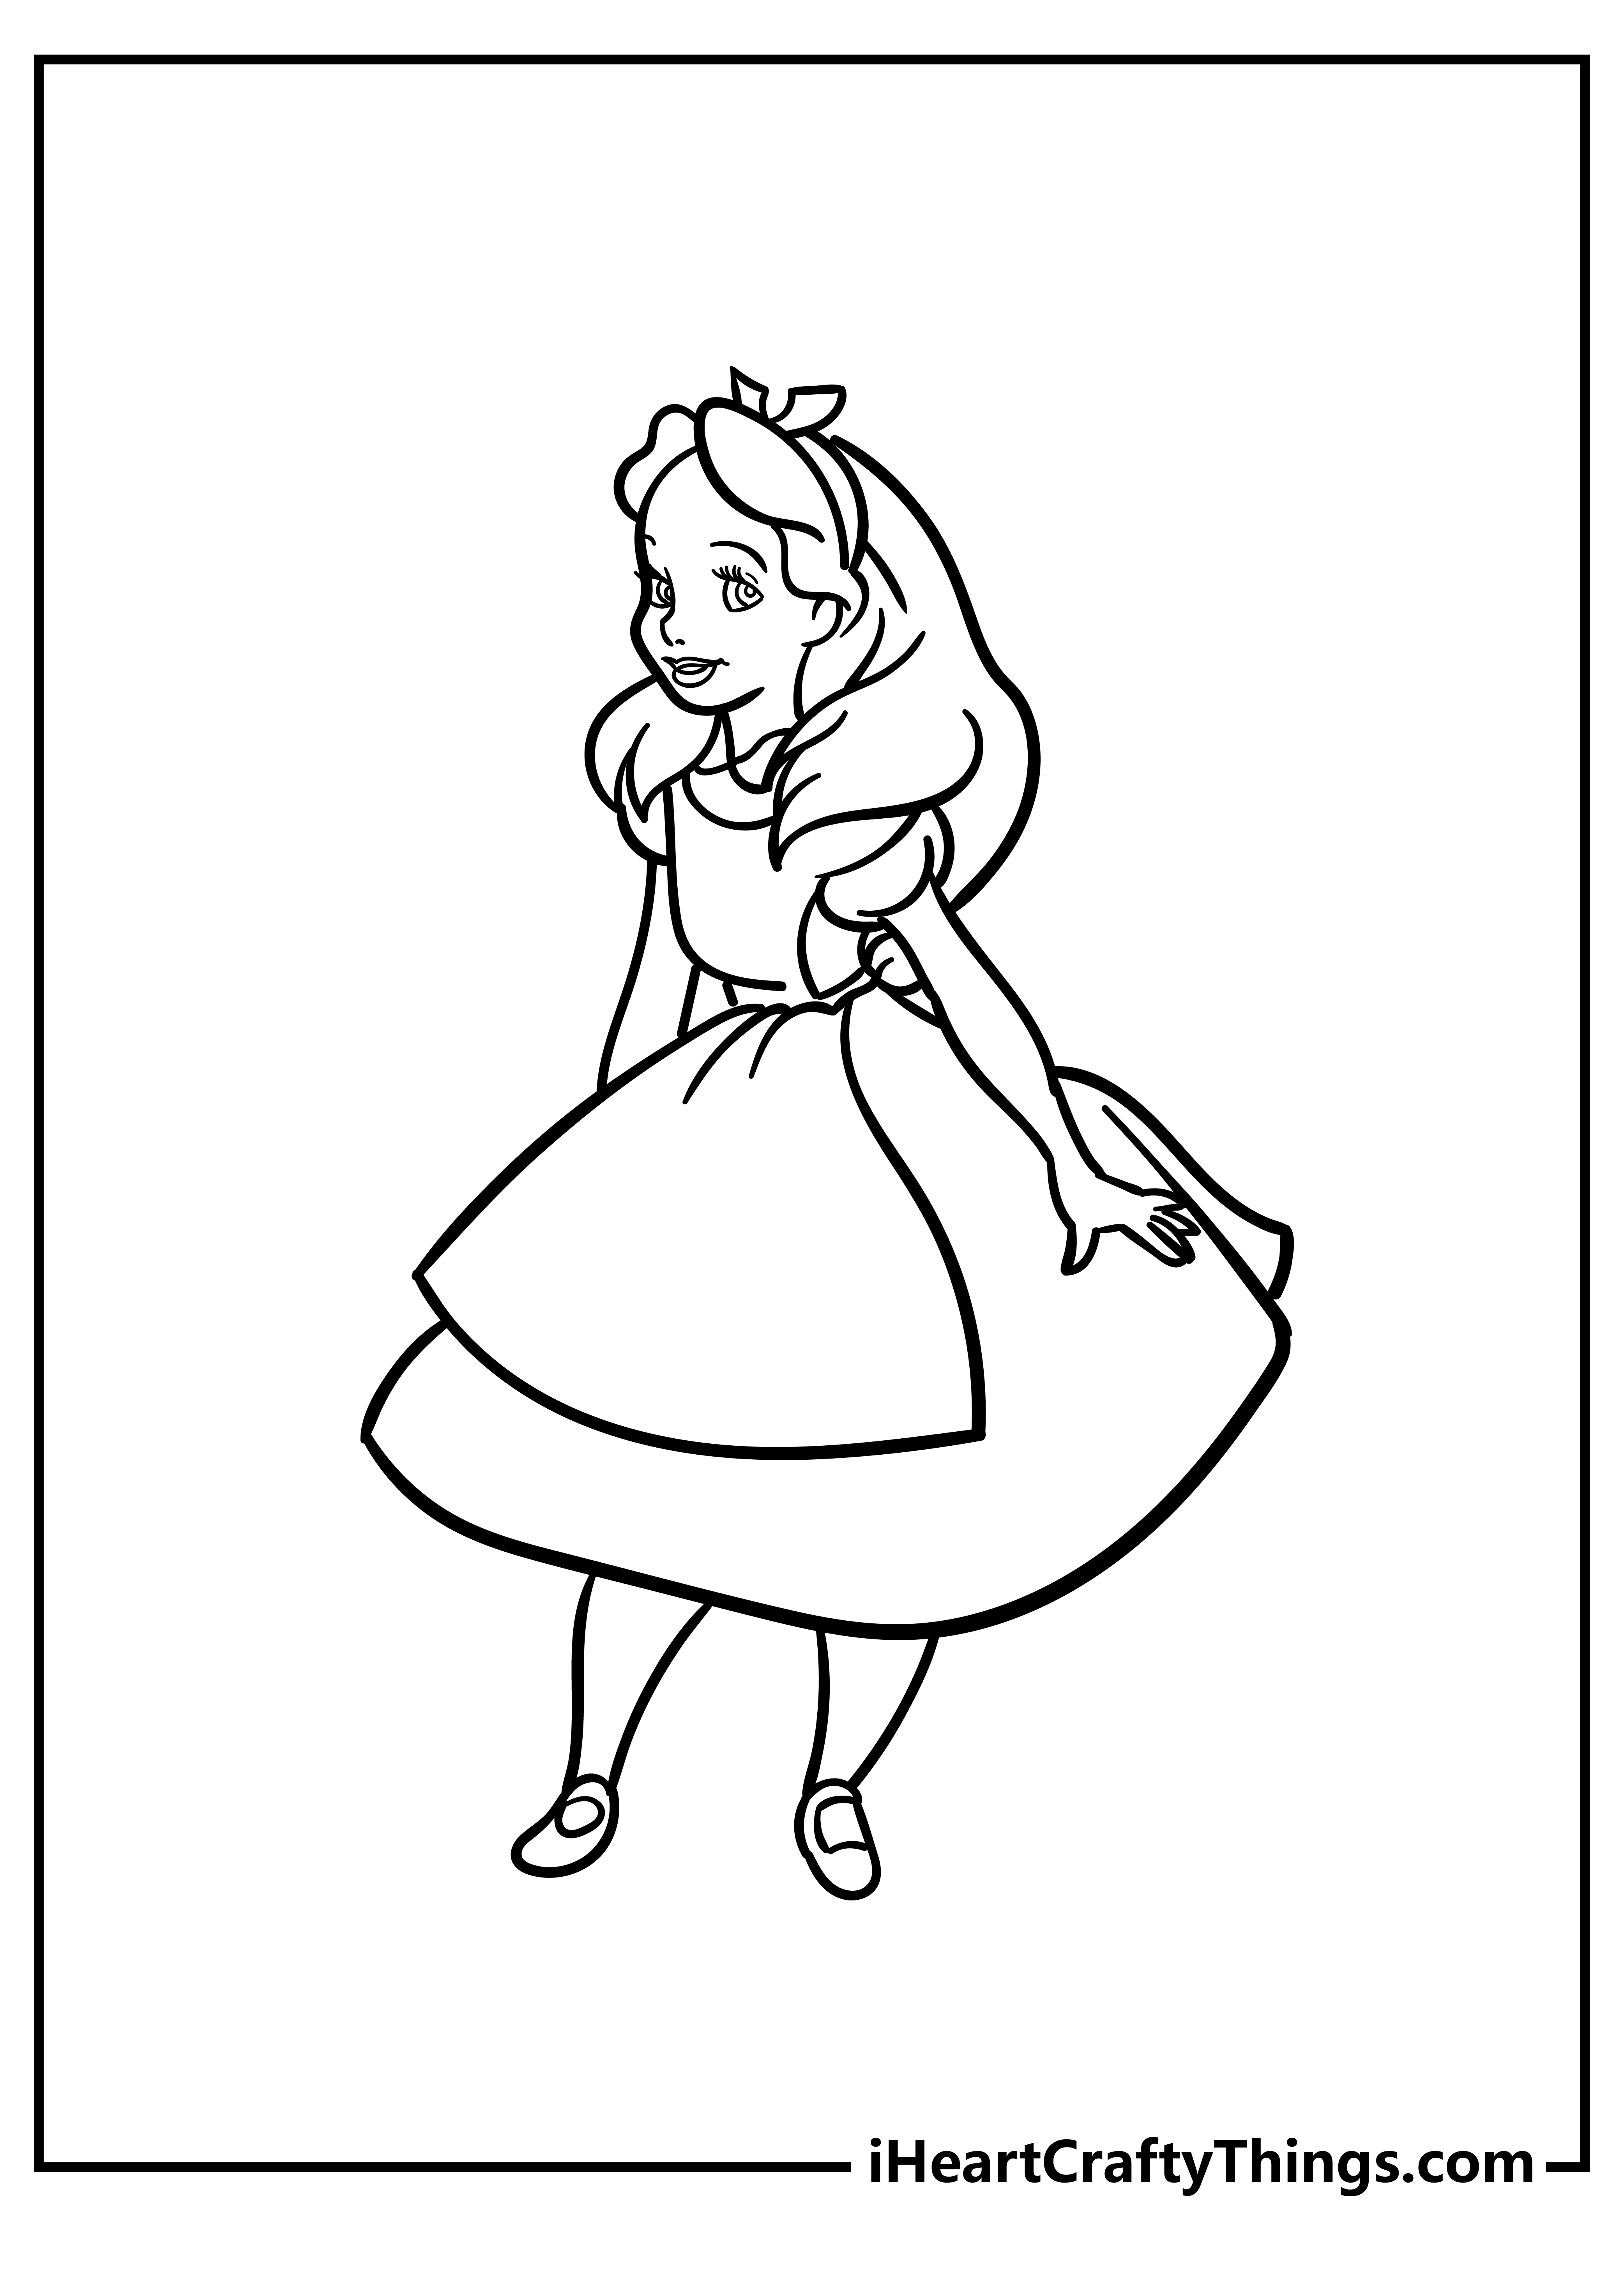 Alice In Wonderland Coloring Pages for kids free download